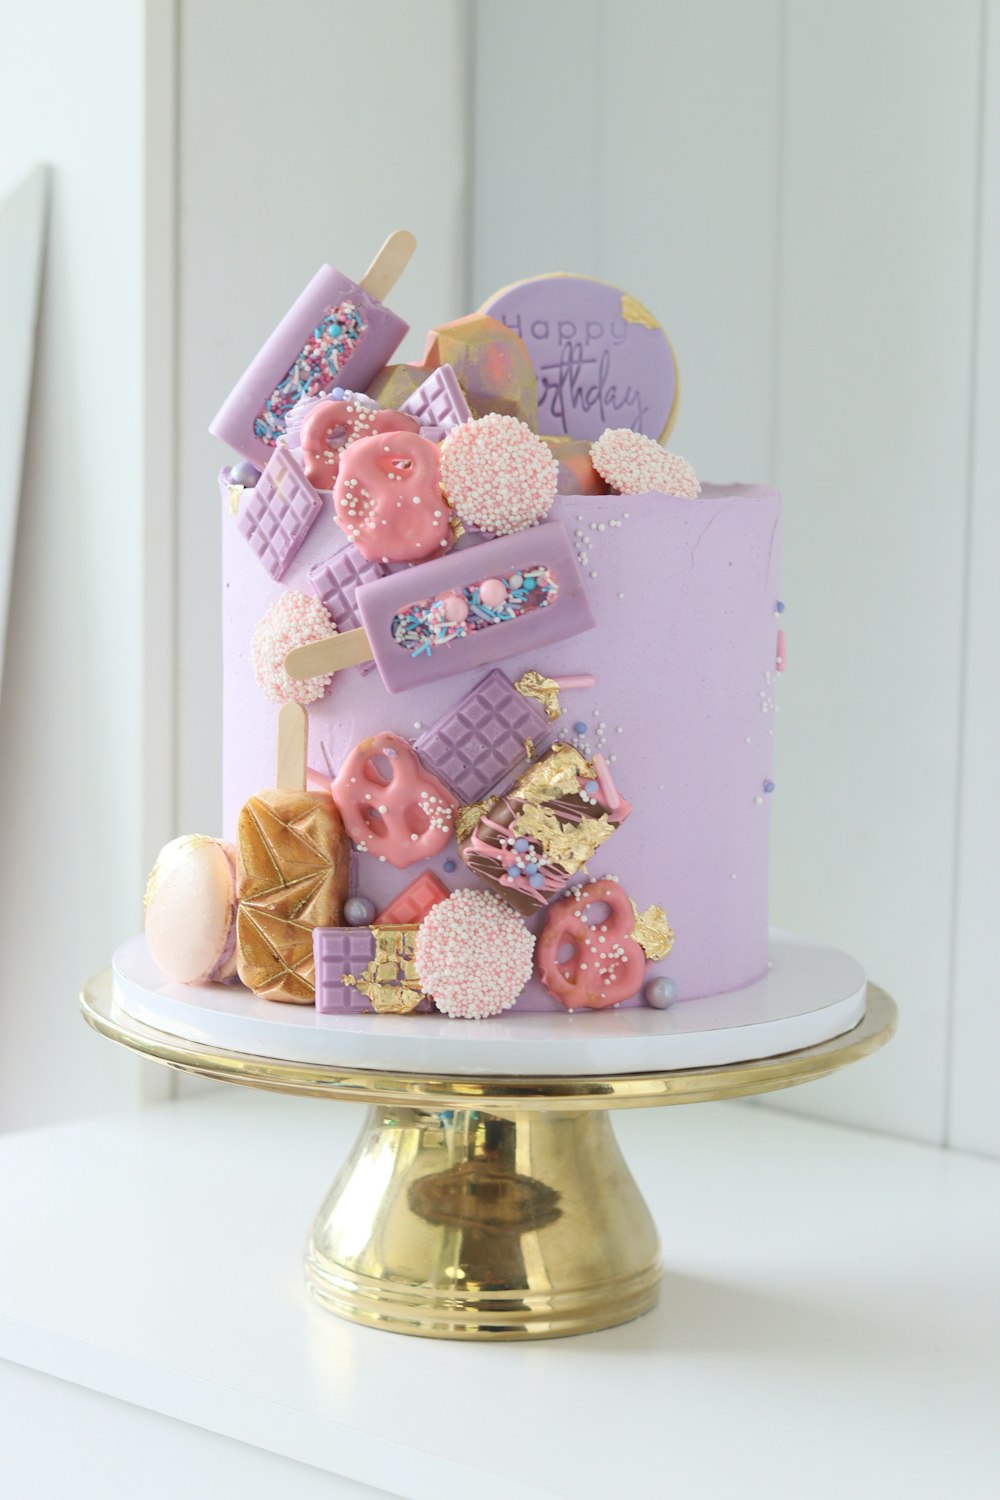 a purple and pink cake on a gold plate